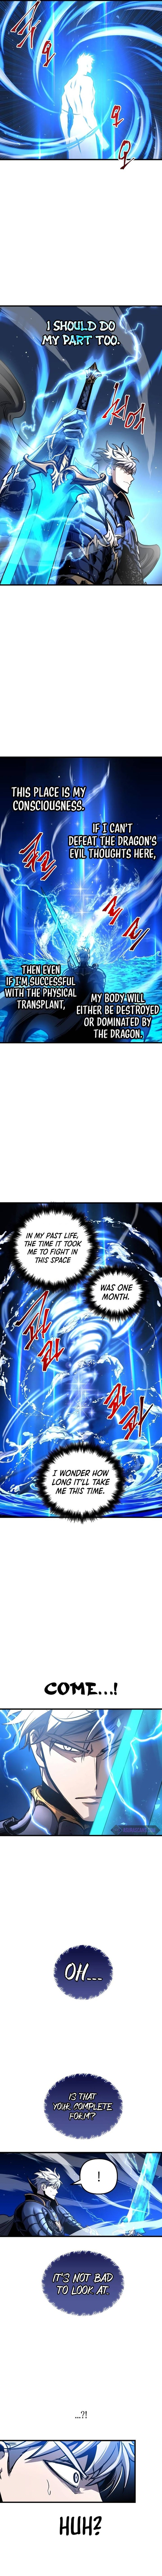 Reincarnation Of The Suicidal Battle God Chapter 72 Page 10